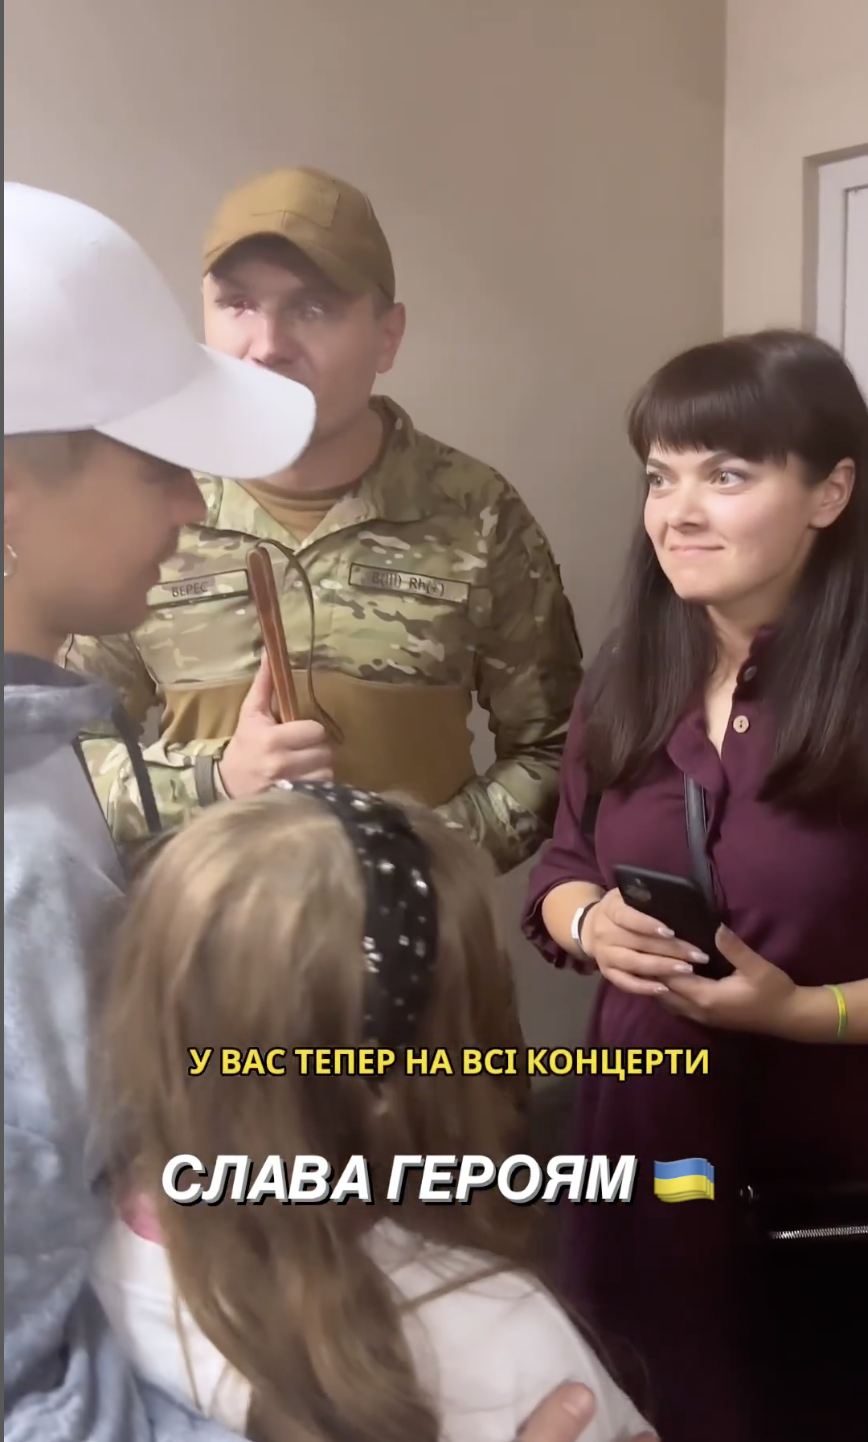 Pyvovarov's conversation with an Armed Forces soldier who lost his eyes in the war brought the network to tears. Video